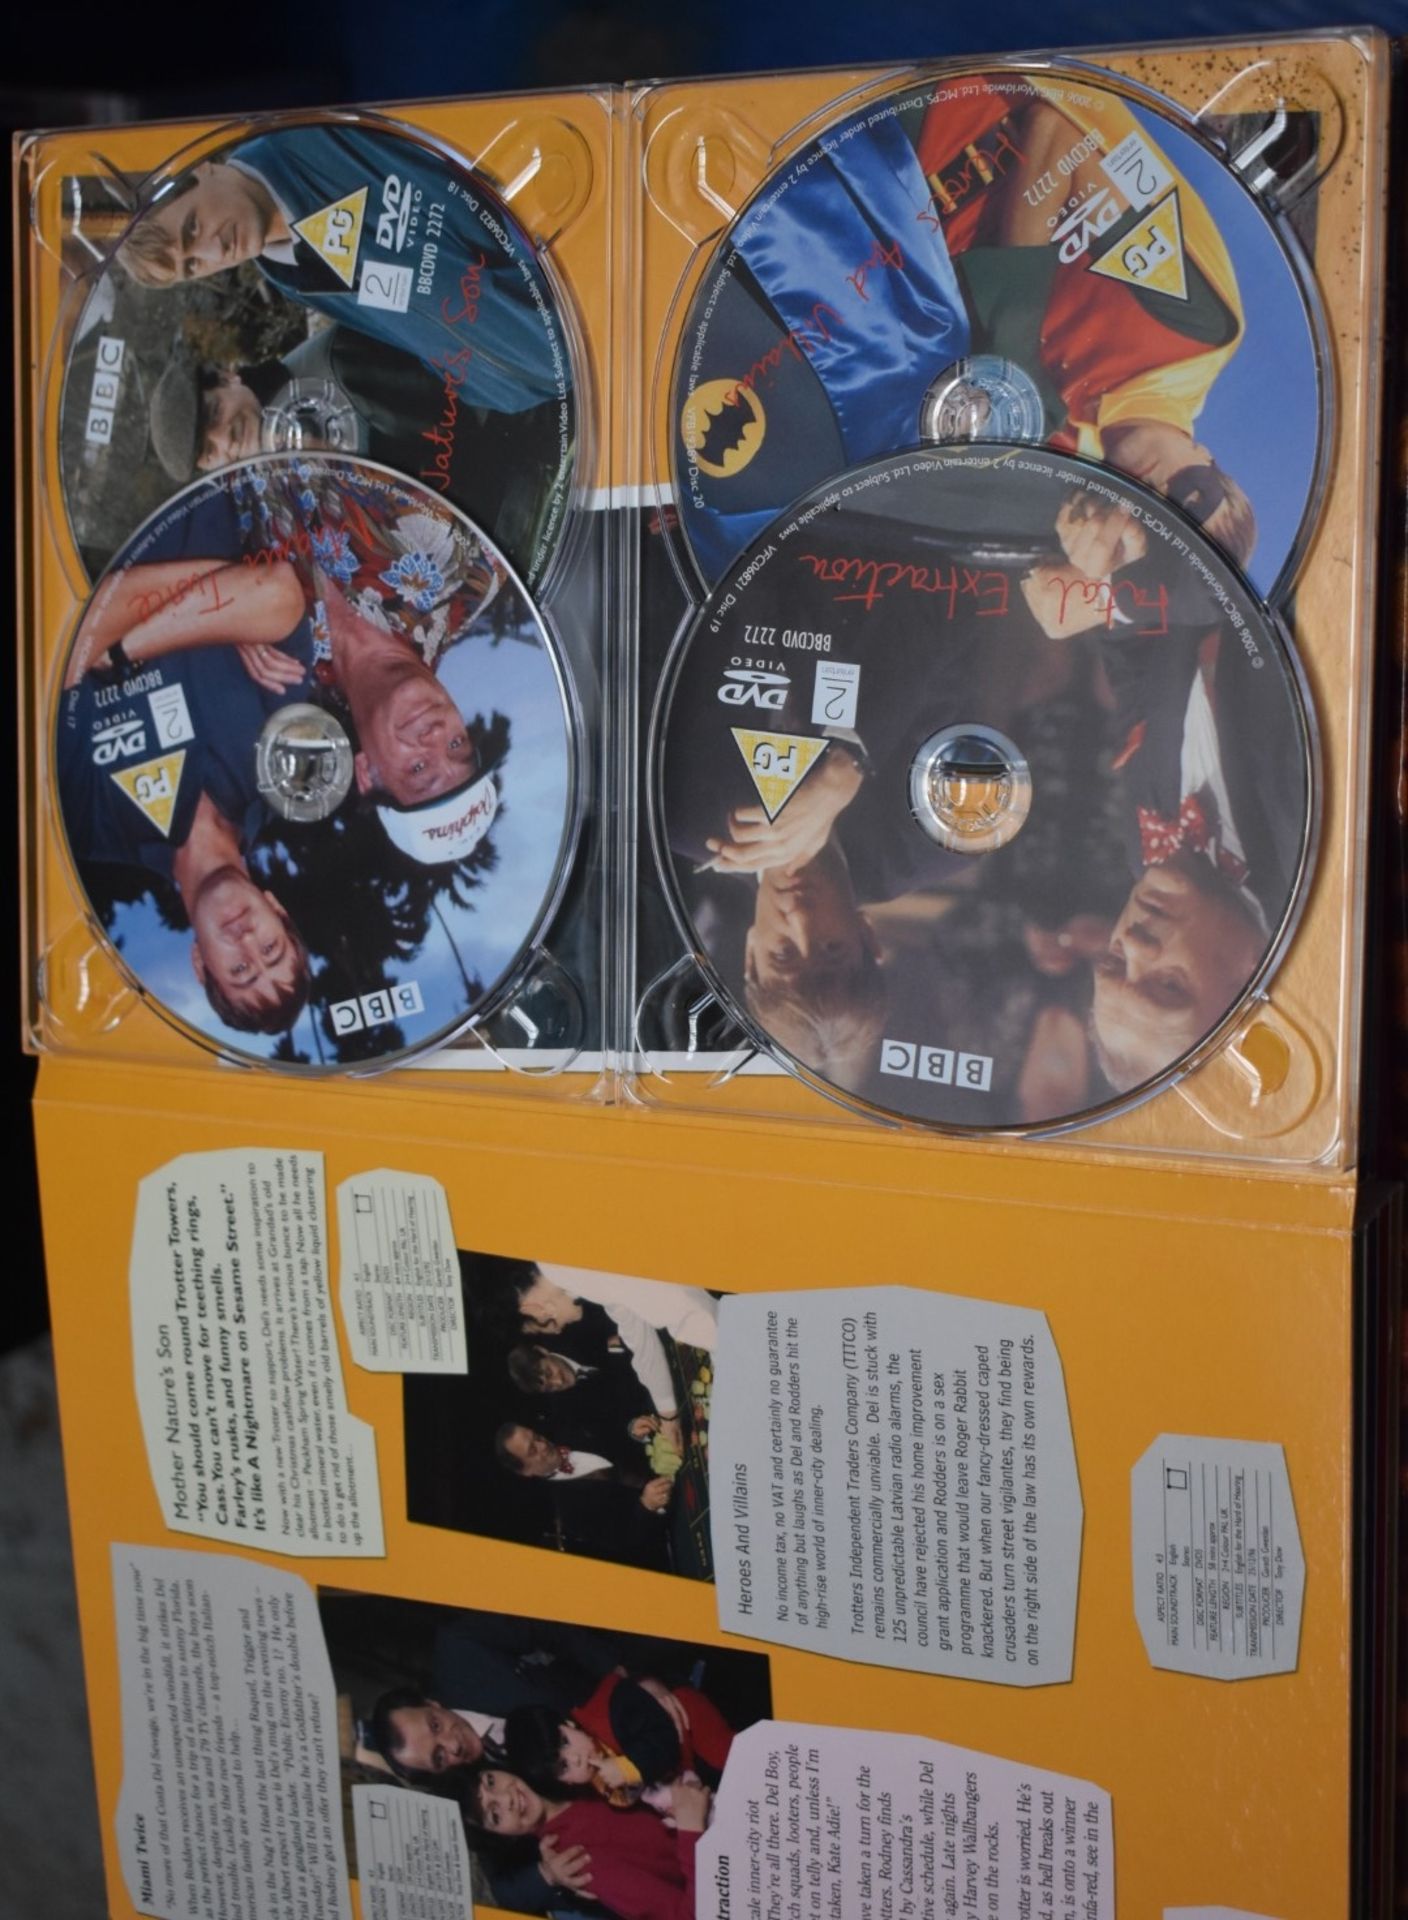 1 x Only Fools and Horses DVD Box Set - Includes 25 Discs Full of Only Fools and Horses Classics - - Image 2 of 4